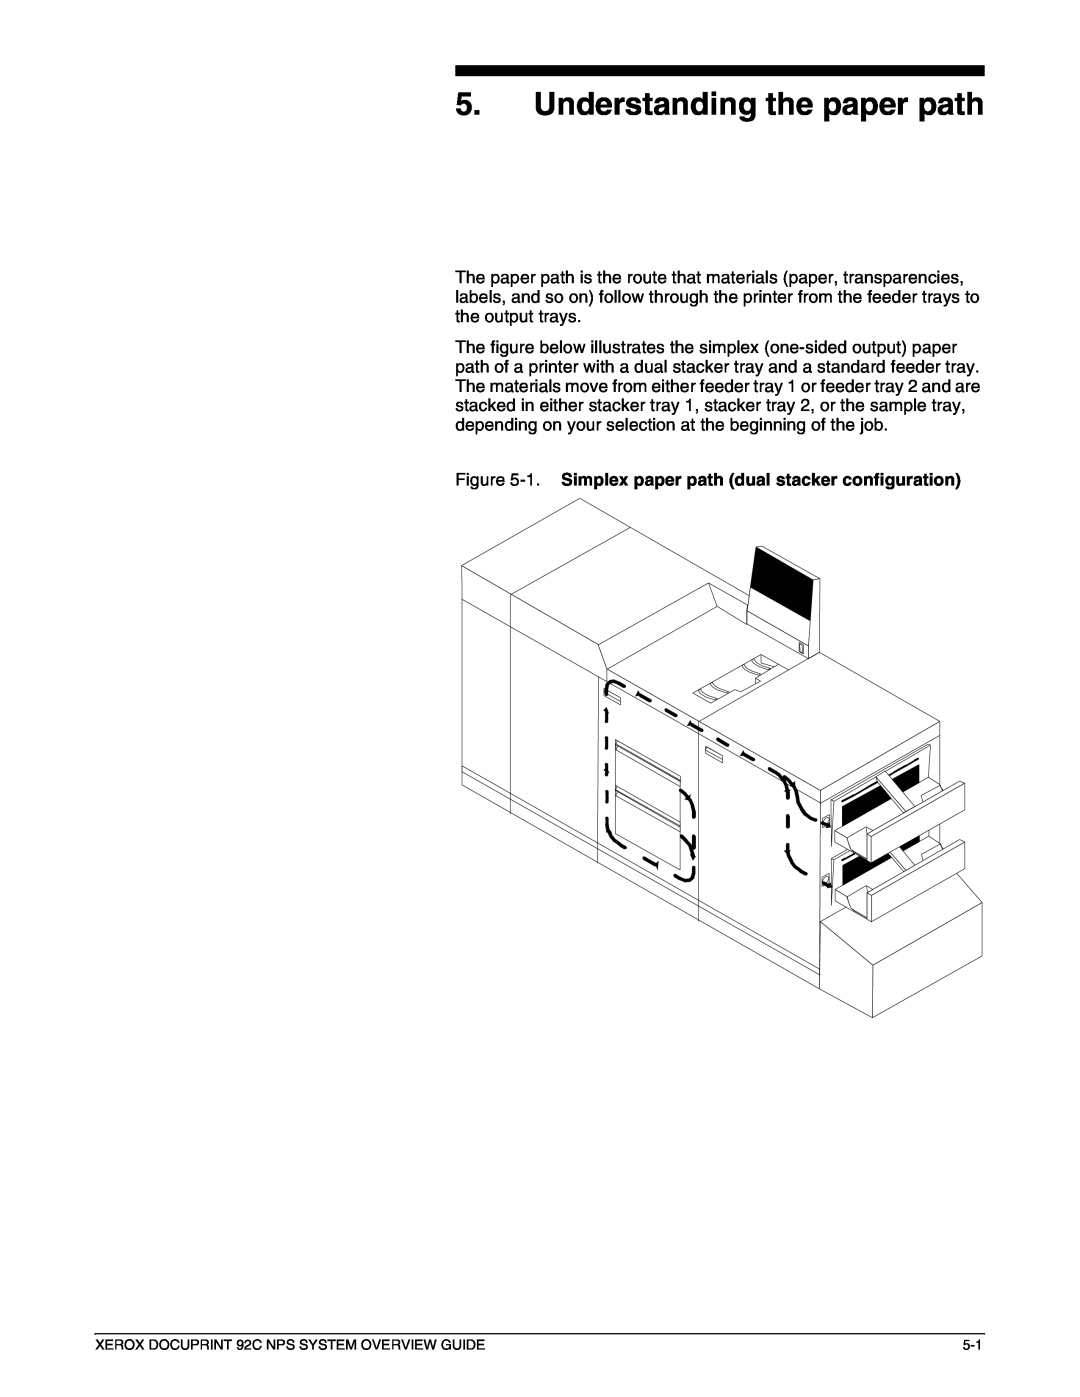 Xerox 92C NPS manual Understanding the paper path, 1. Simplex paper path dual stacker configuration 